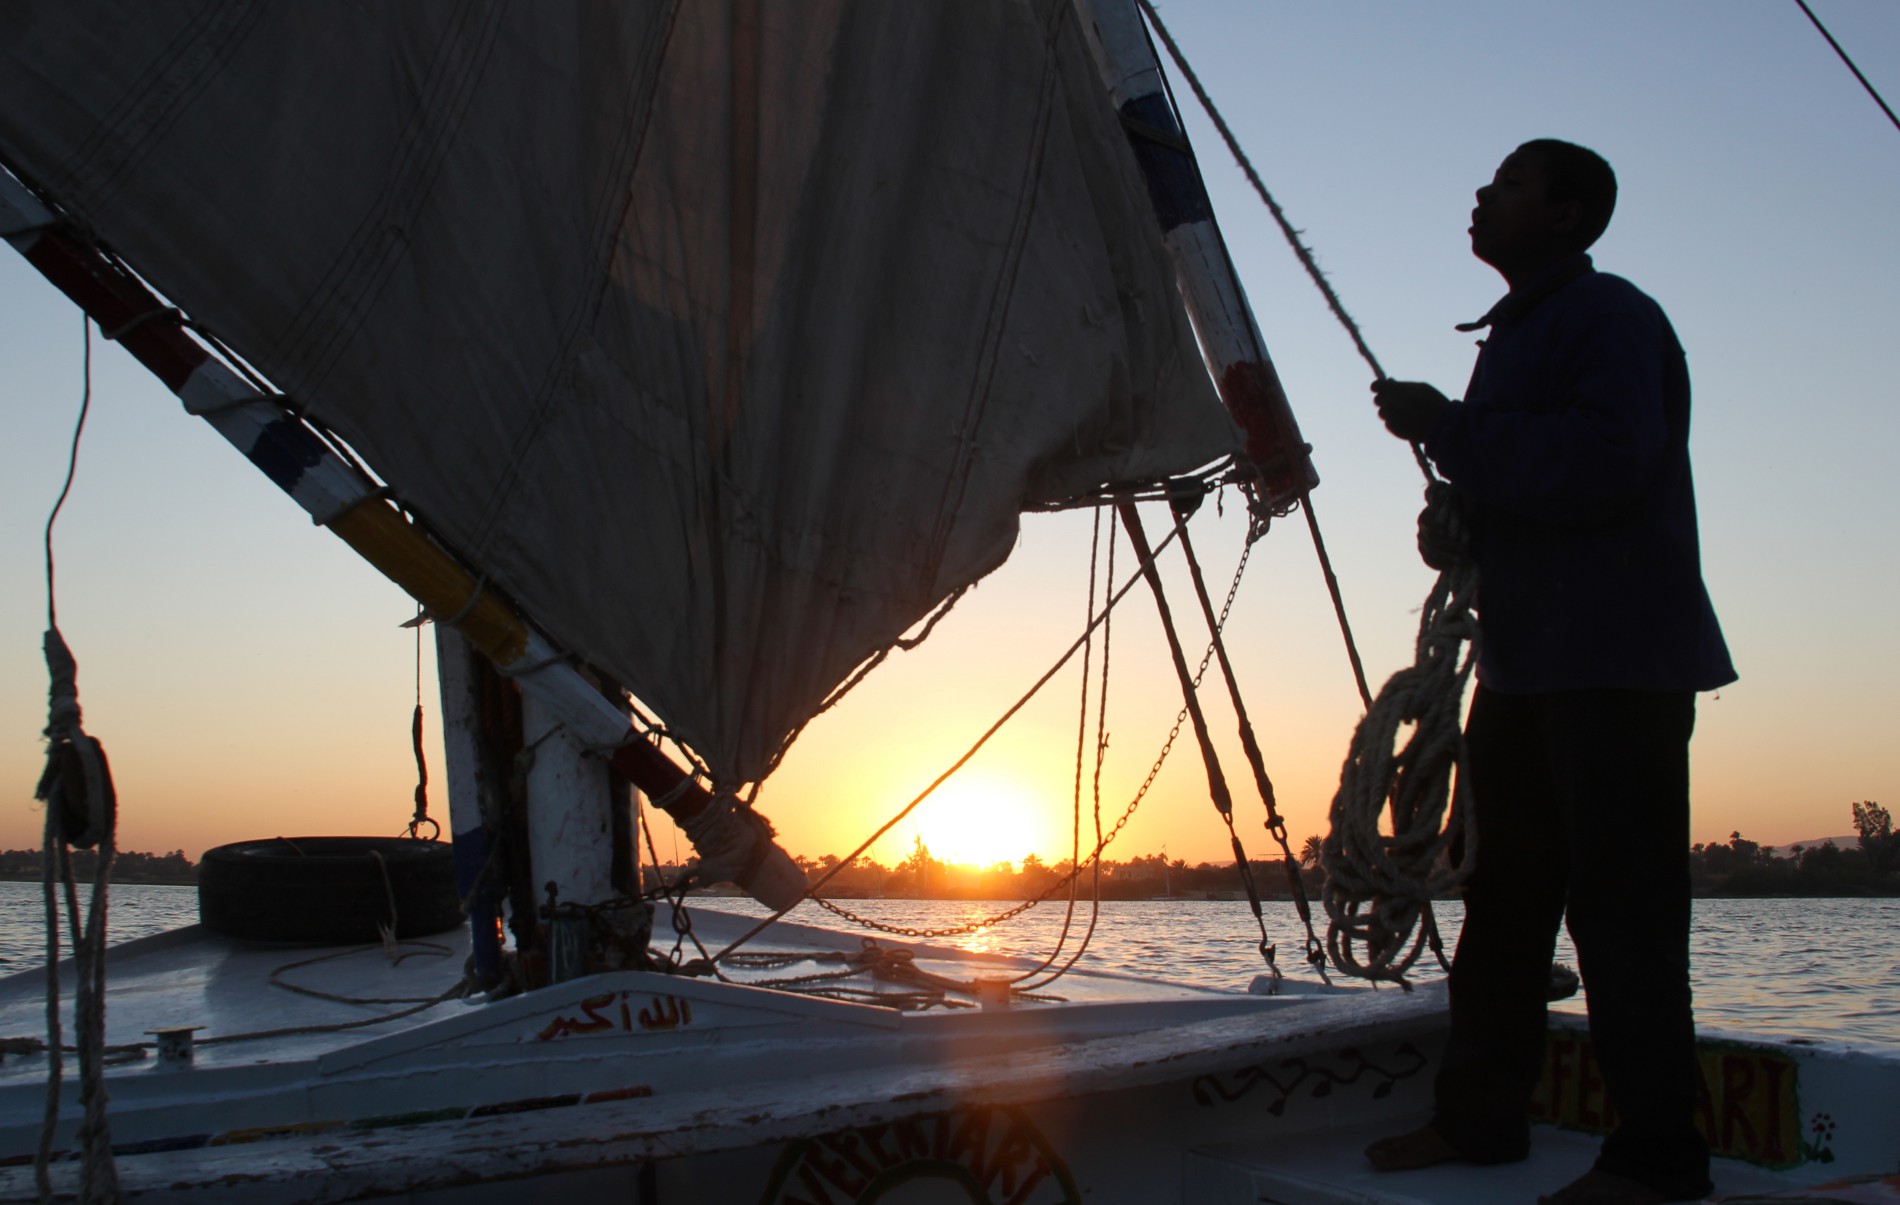 A felucca captain adjusts the sail on his boat on the Nile River at sunset.